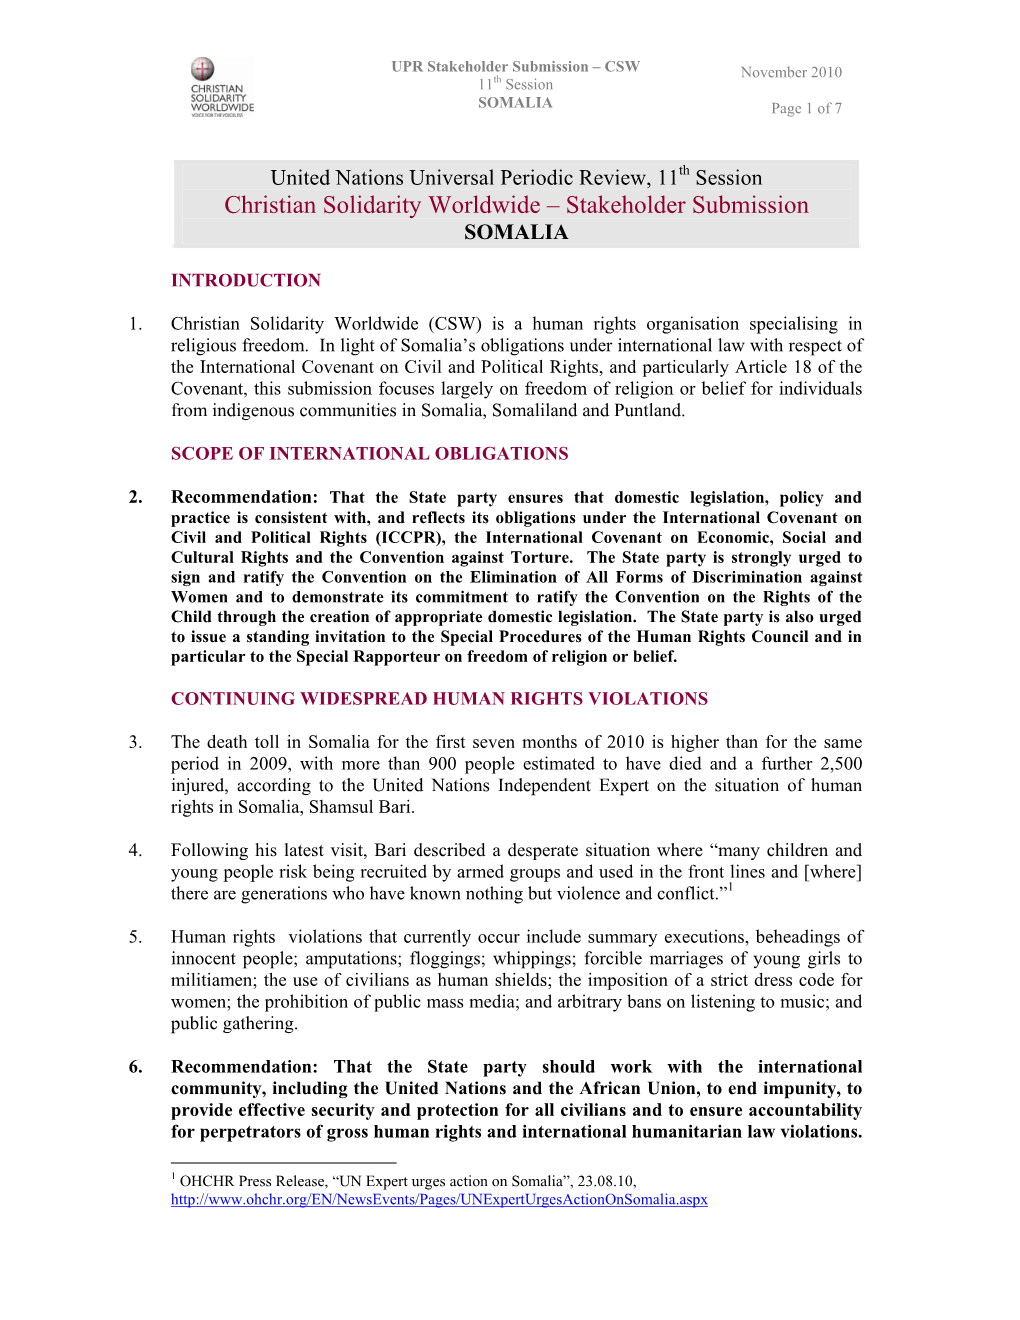 Christian Solidarity Worldwide – Stakeholder Submission SOMALIA